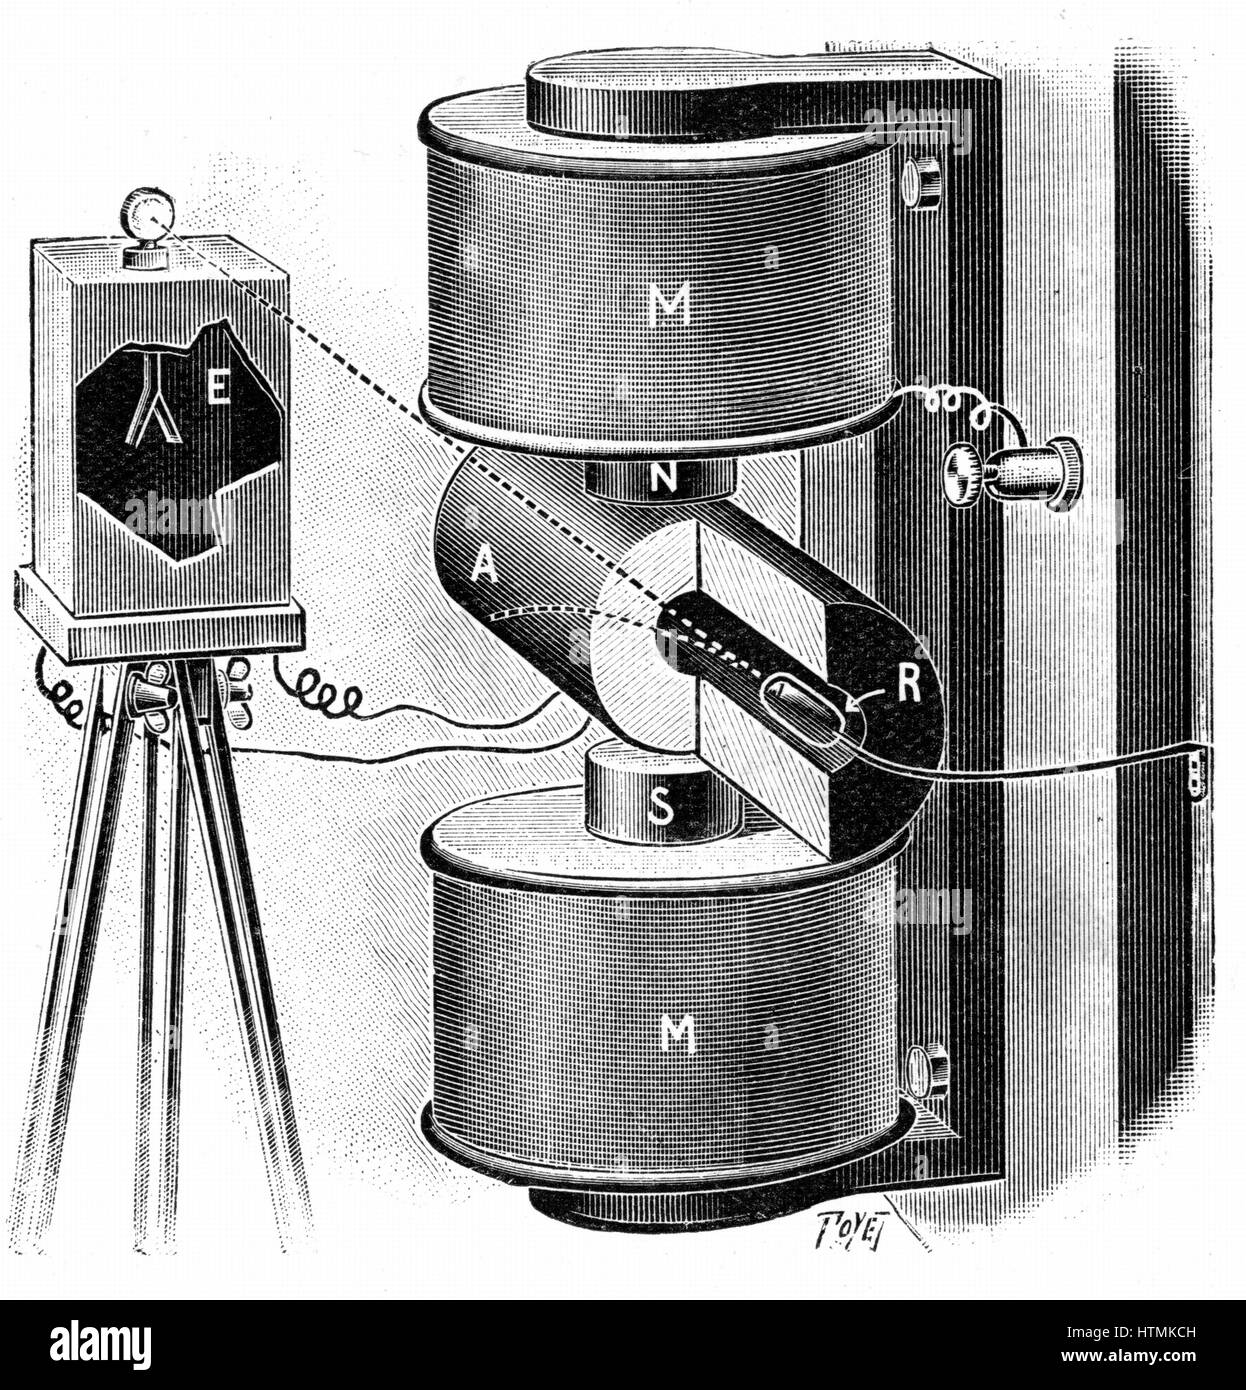 Apparatus used by the Curies to investigate the deflection of the beta rays from radium (R) in magnetic field. Engraving published Paris 1904 Stock Photo